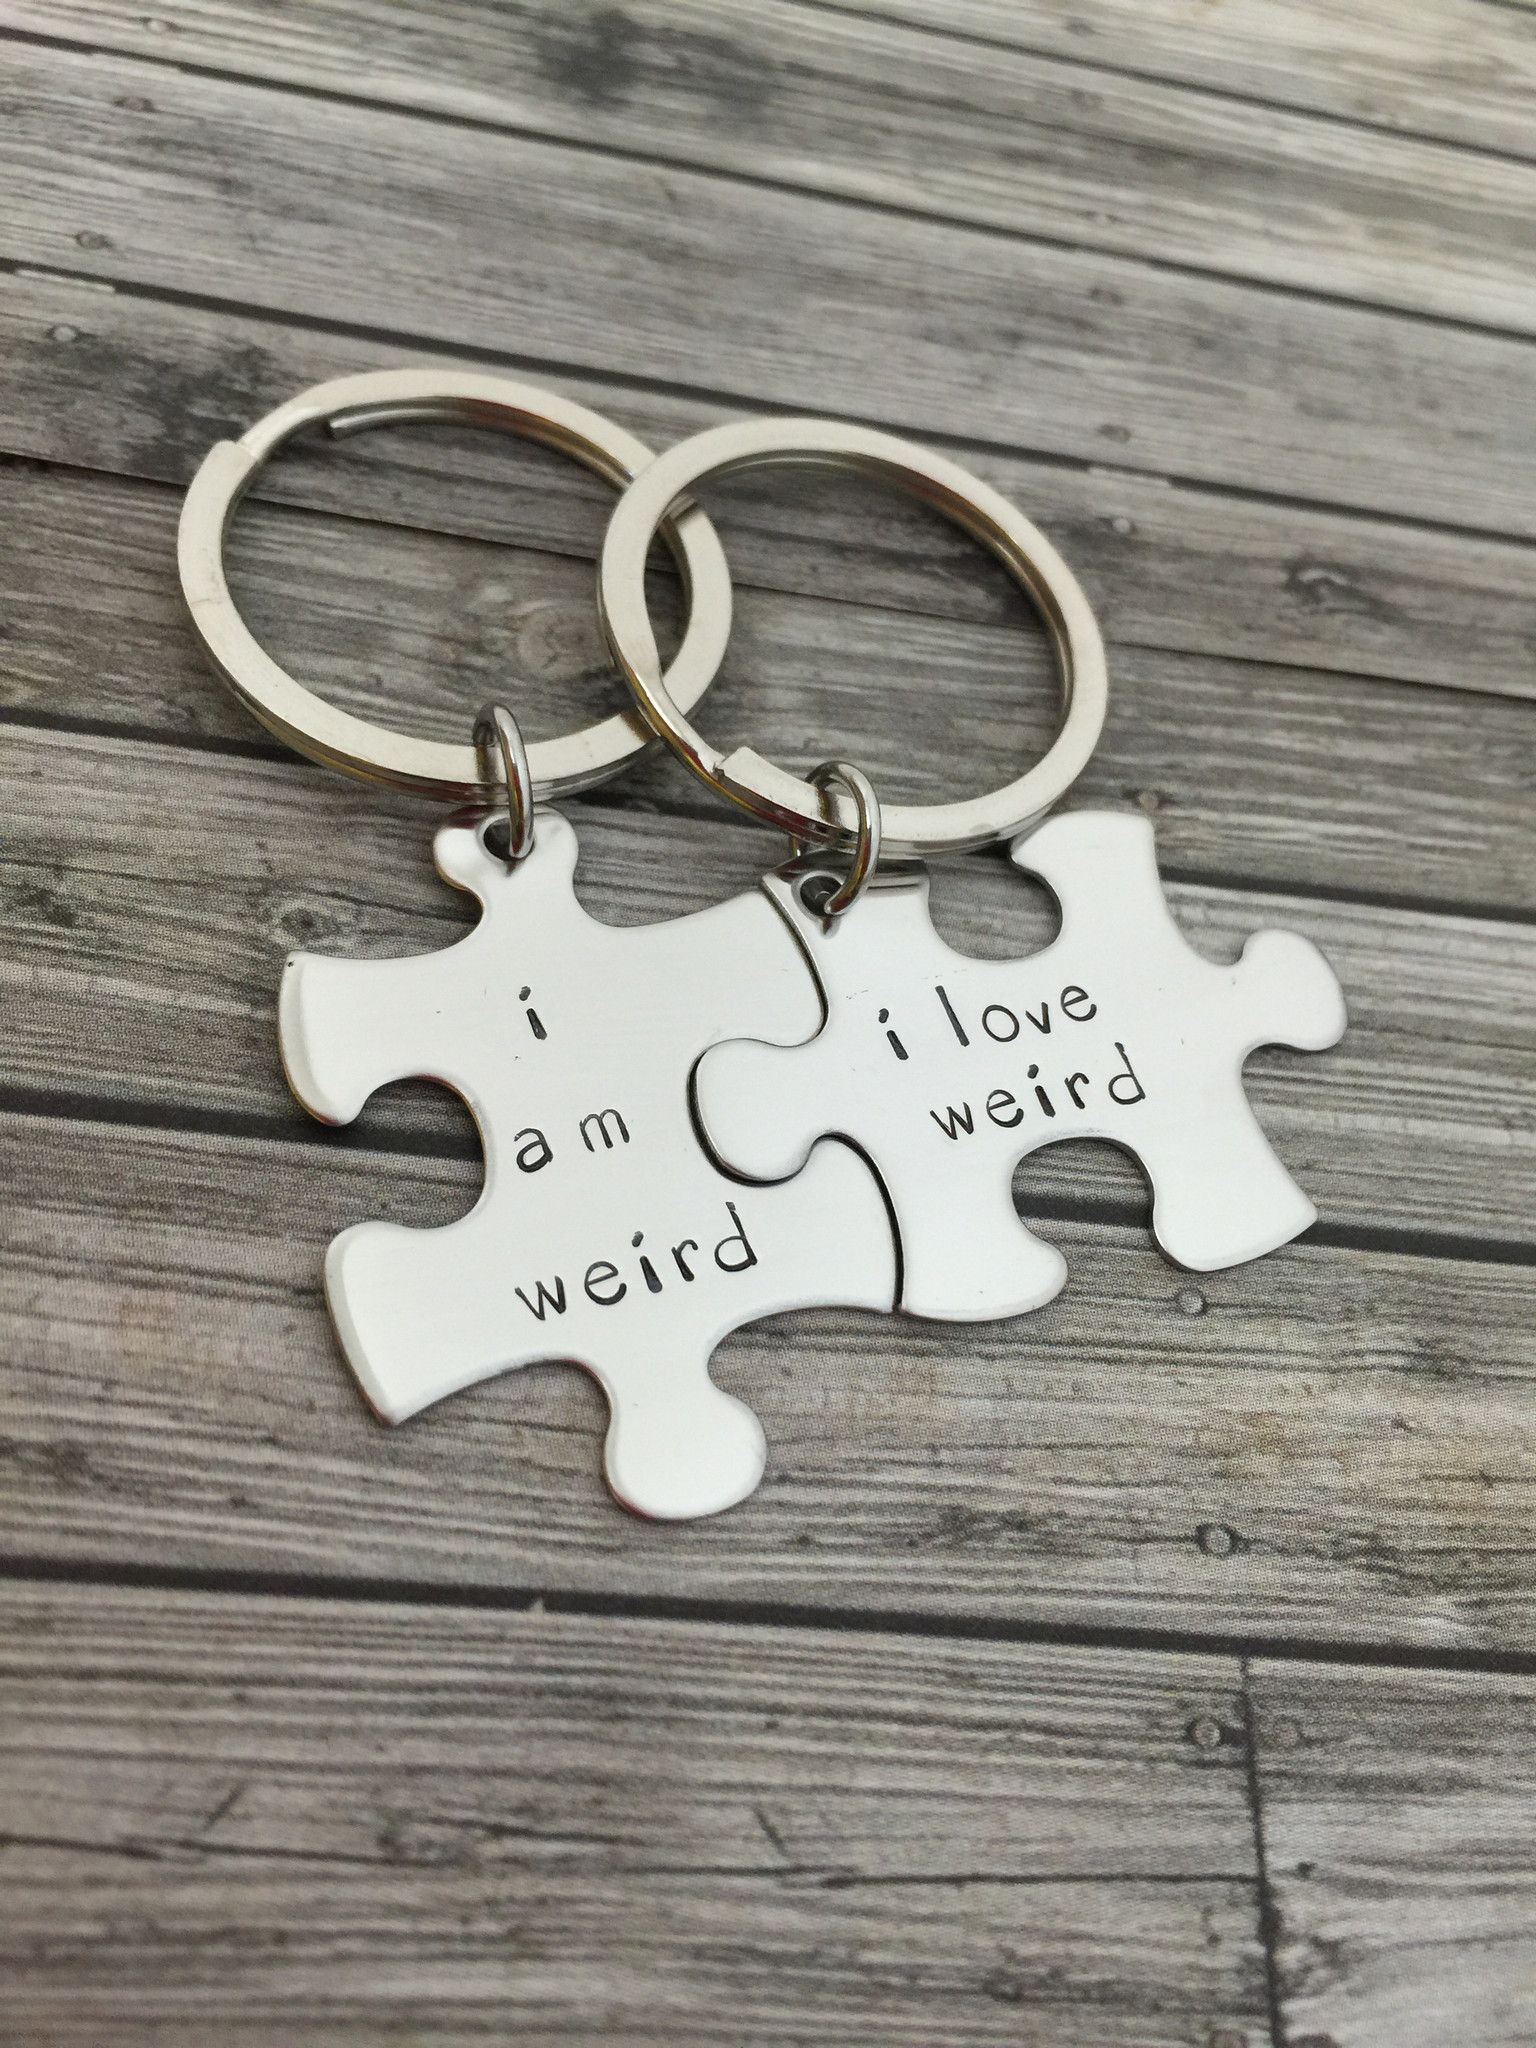 Couples Gift Ideas For Him
 I am weird I love weird Couples Keychains Couples Gift